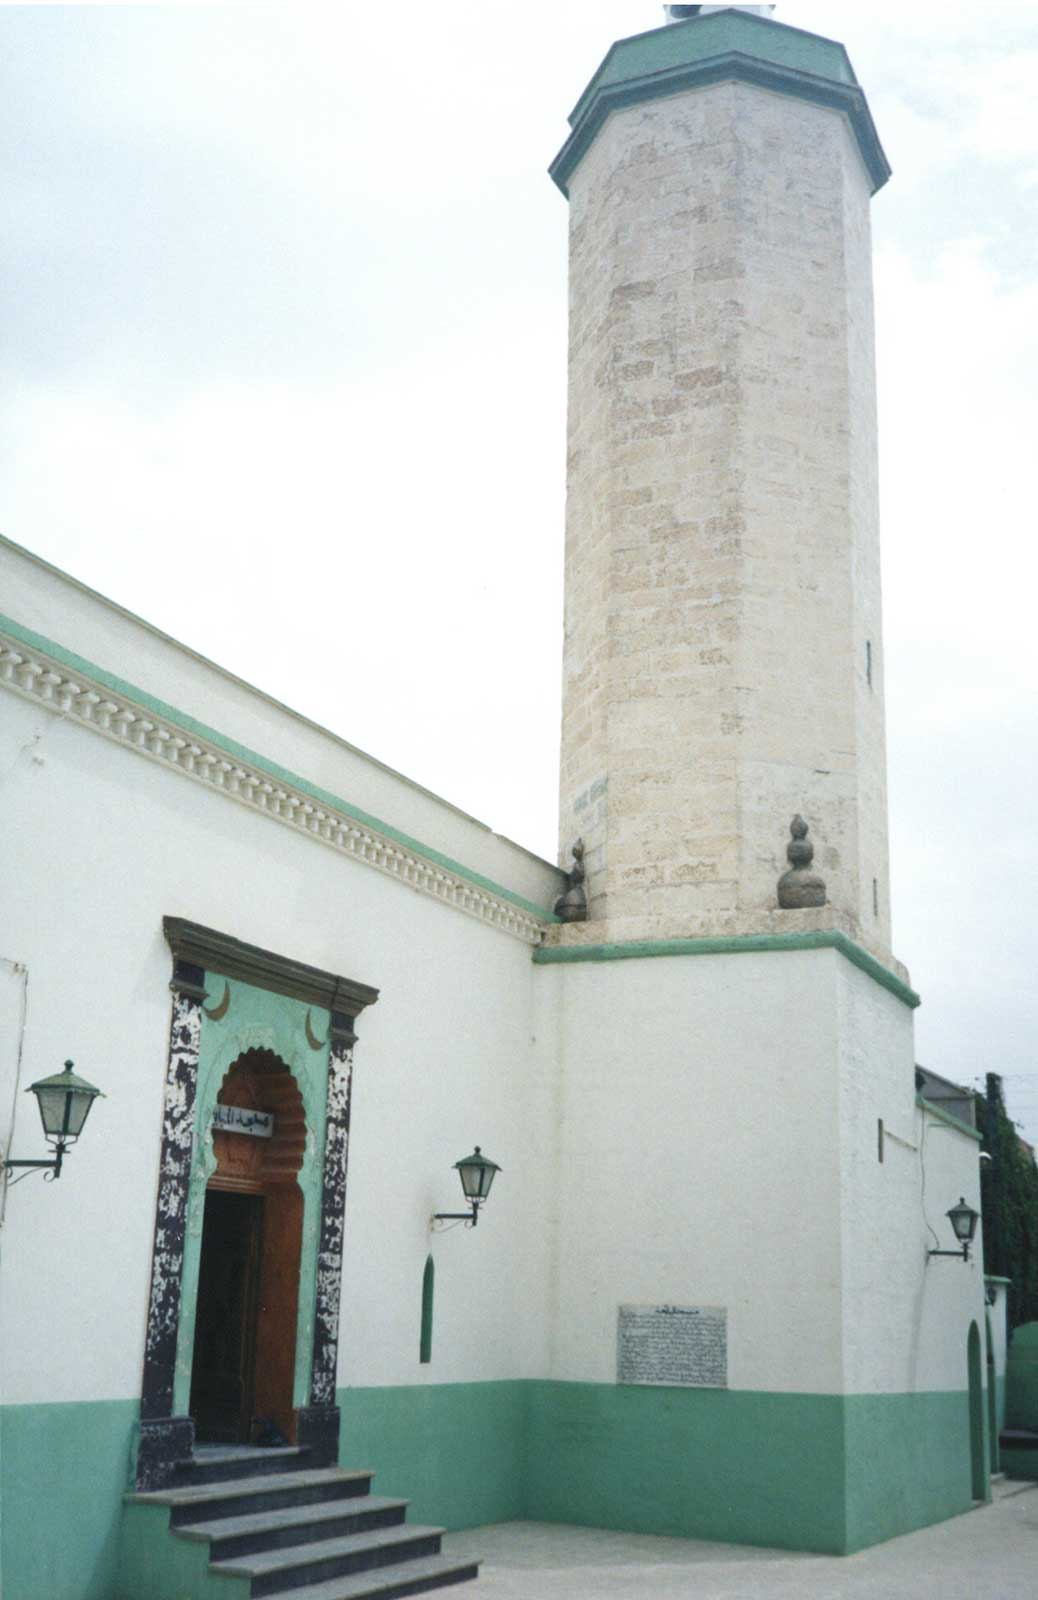 View of the entrance and octagonal minaret